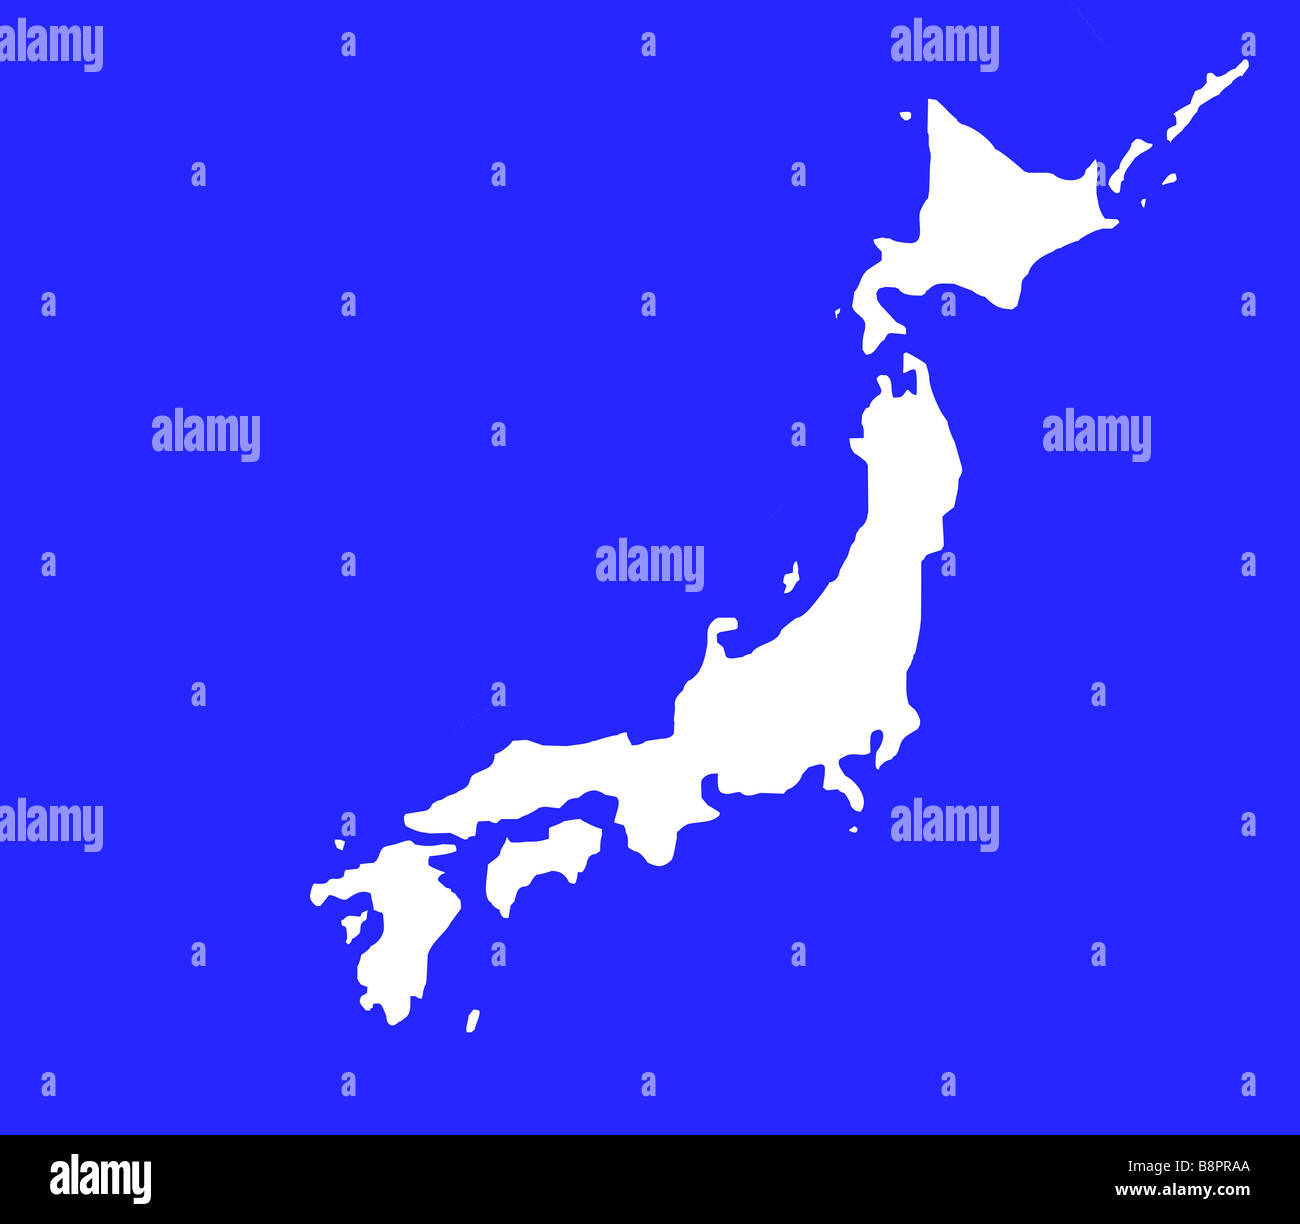 Island of Japan map outline isolated in white on blue background with clipping path Stock Photo